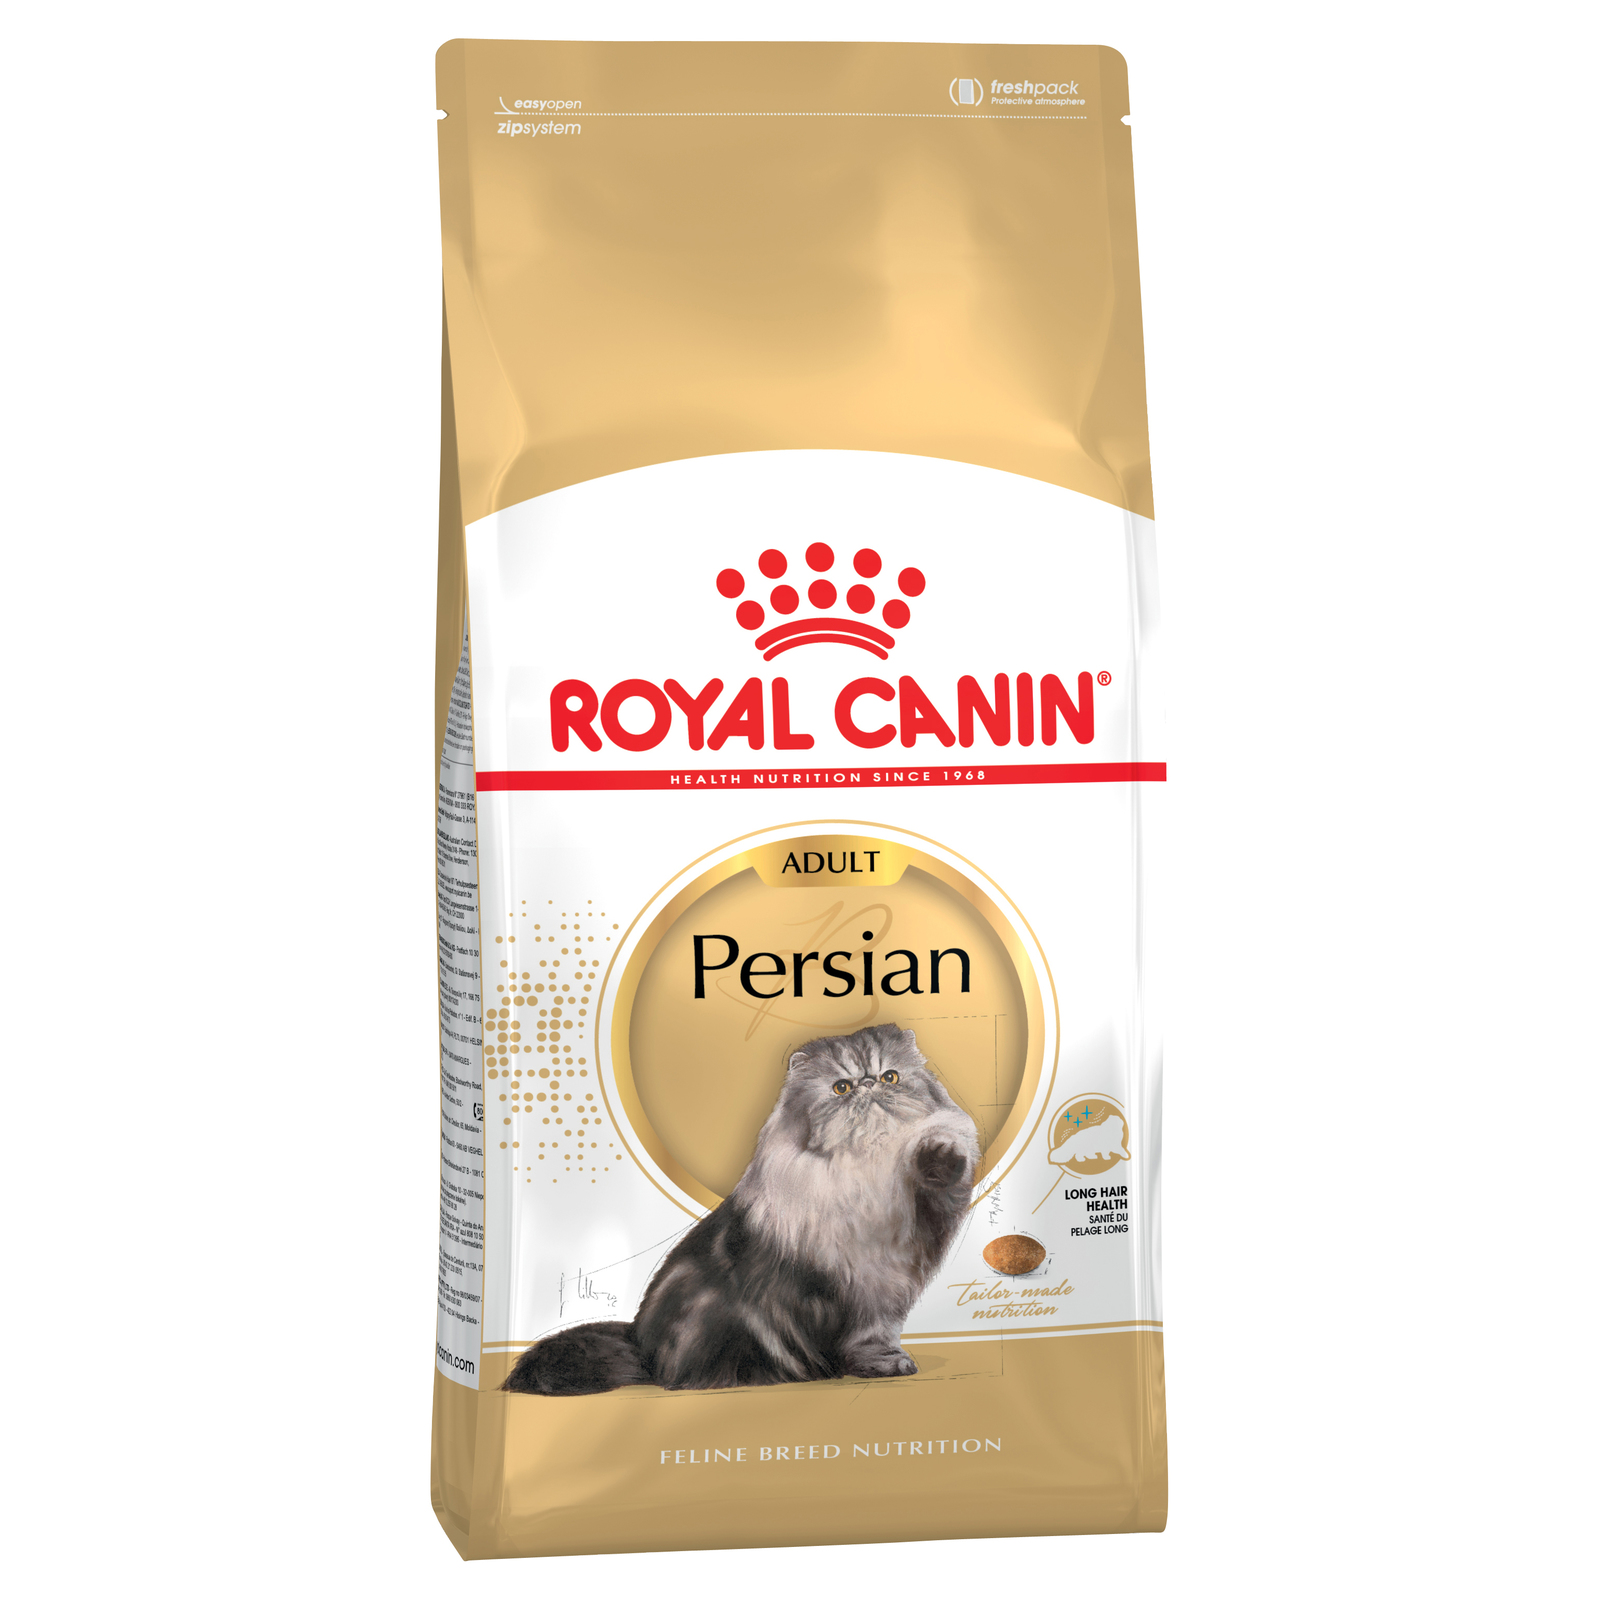 Royal Canin Feline Dry Cat Food for Persian Cats